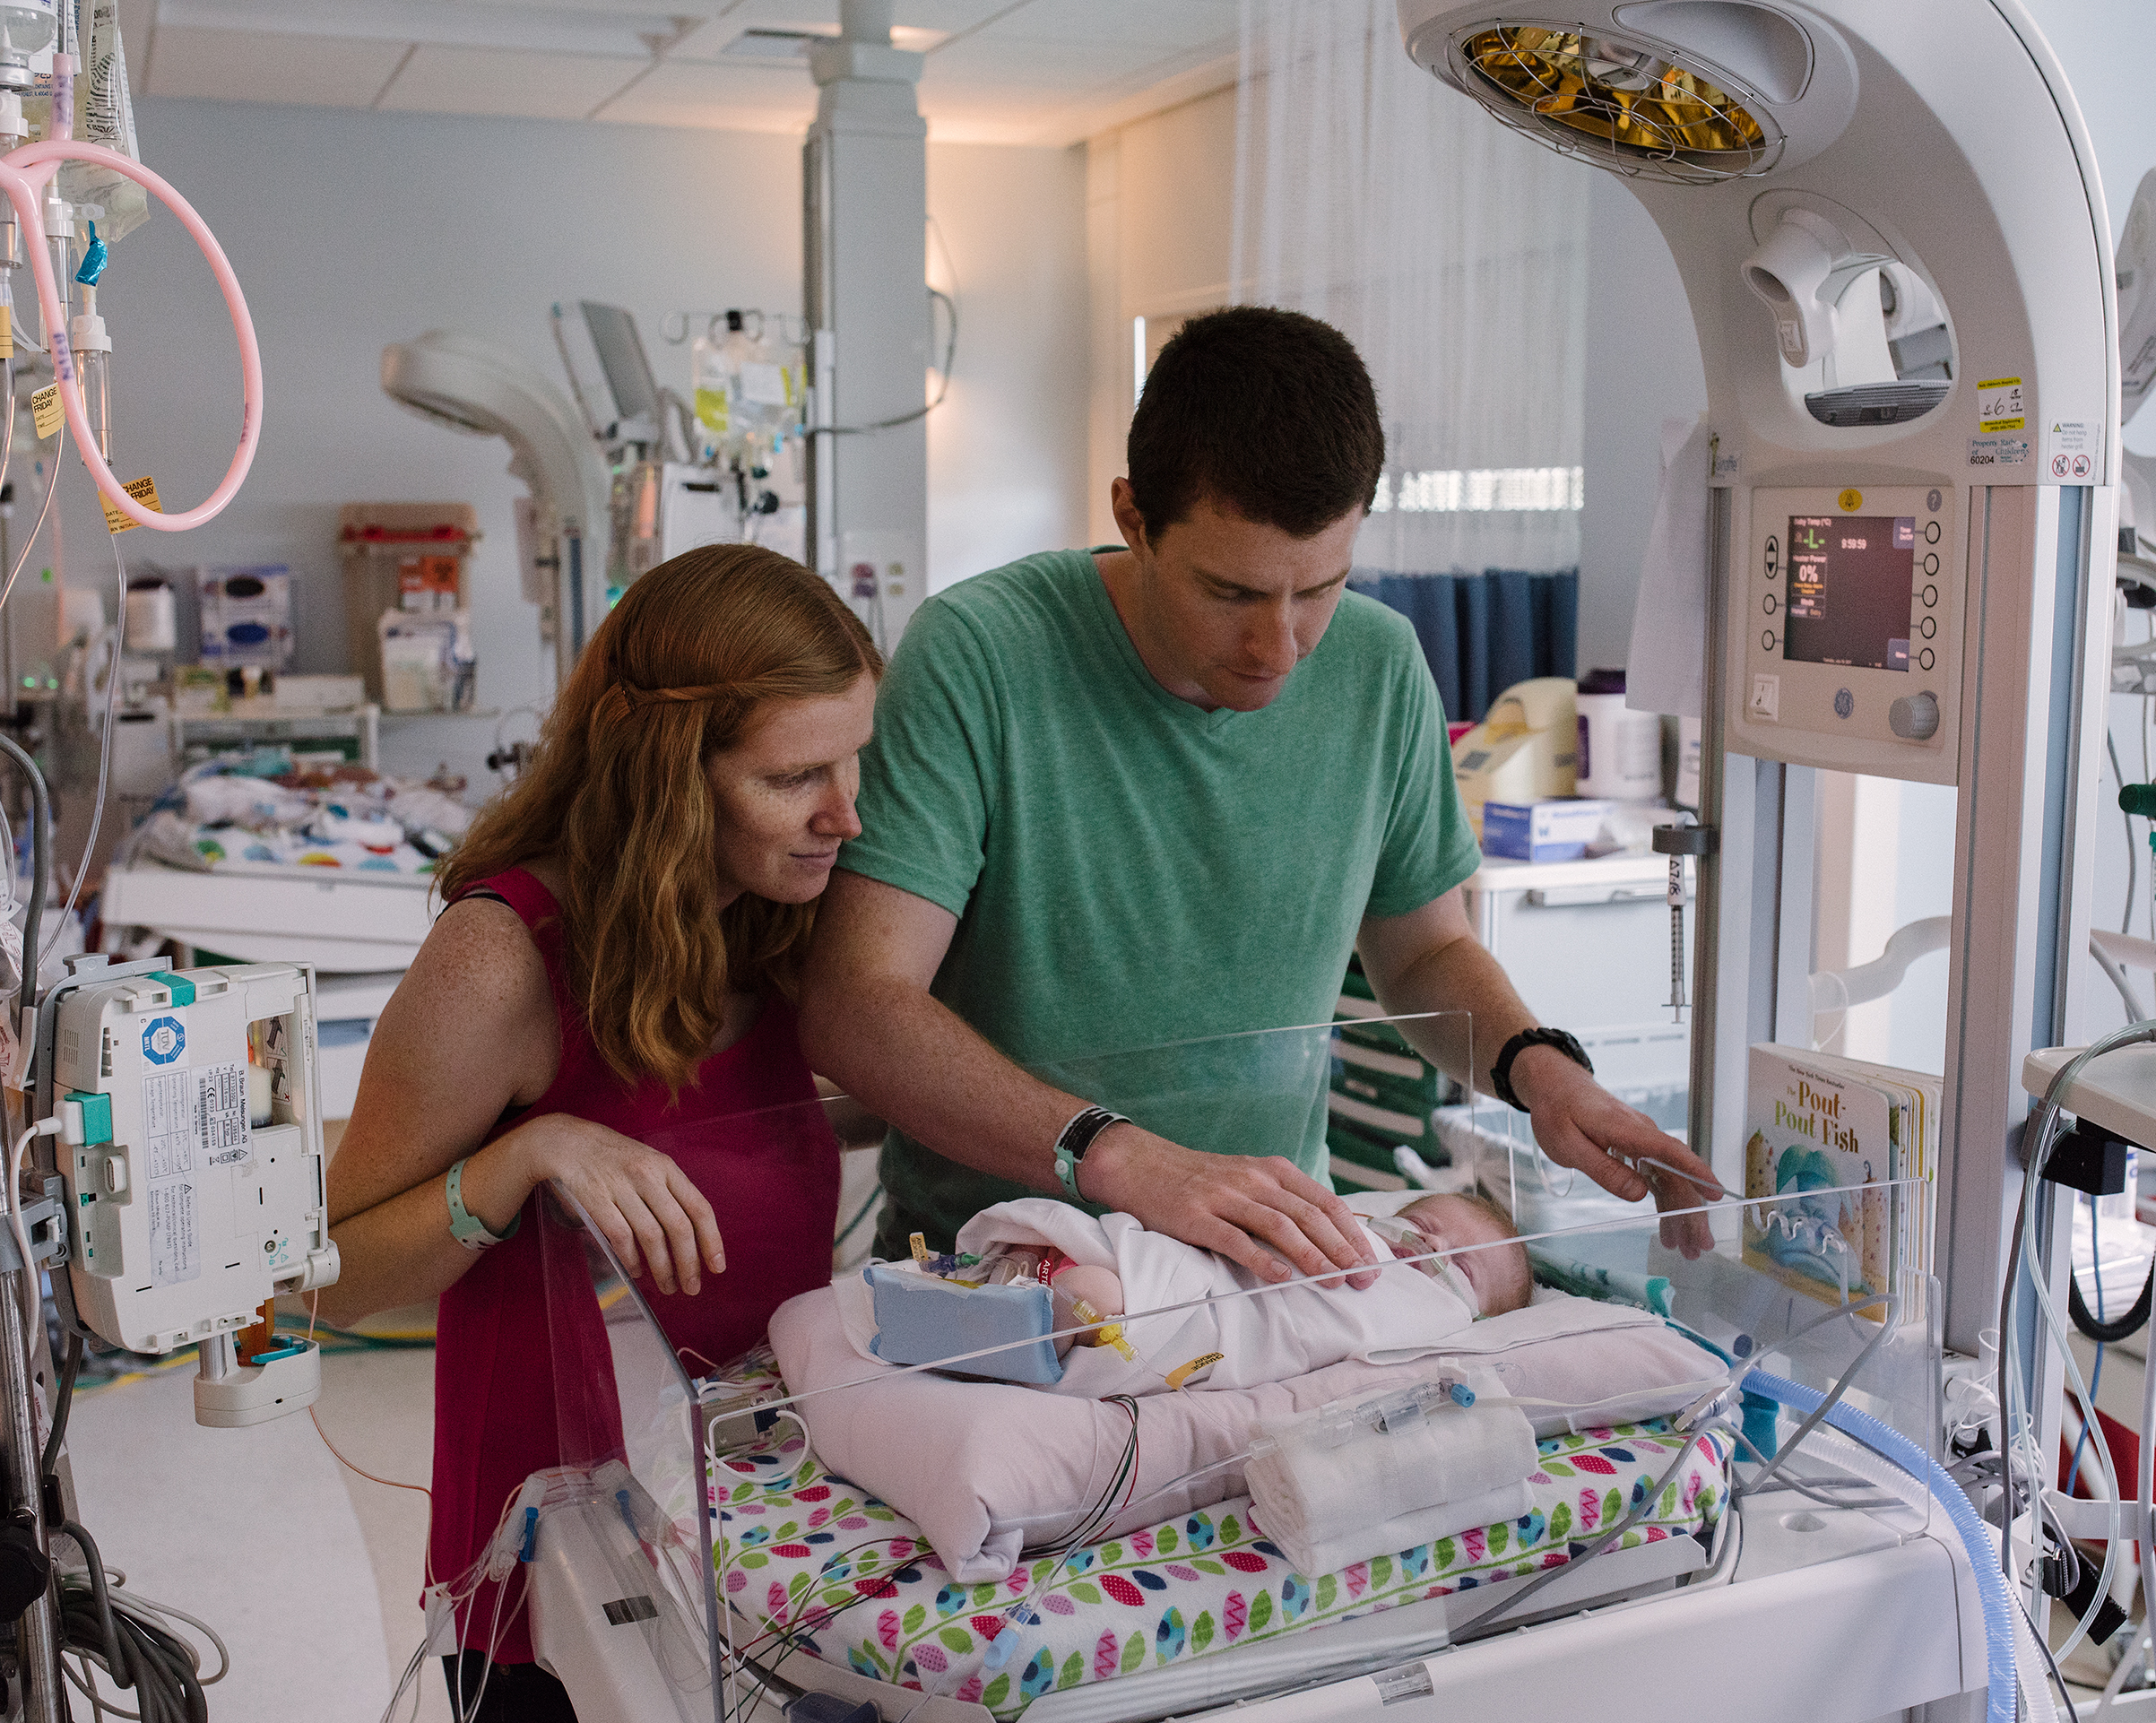 Elizabeth and Tristan Holbrook spend time with their newborn daughter Grace, Rady Children’s Hospital, San Diego, CA, July 18, 2017 (John Francis Peters for TIME)